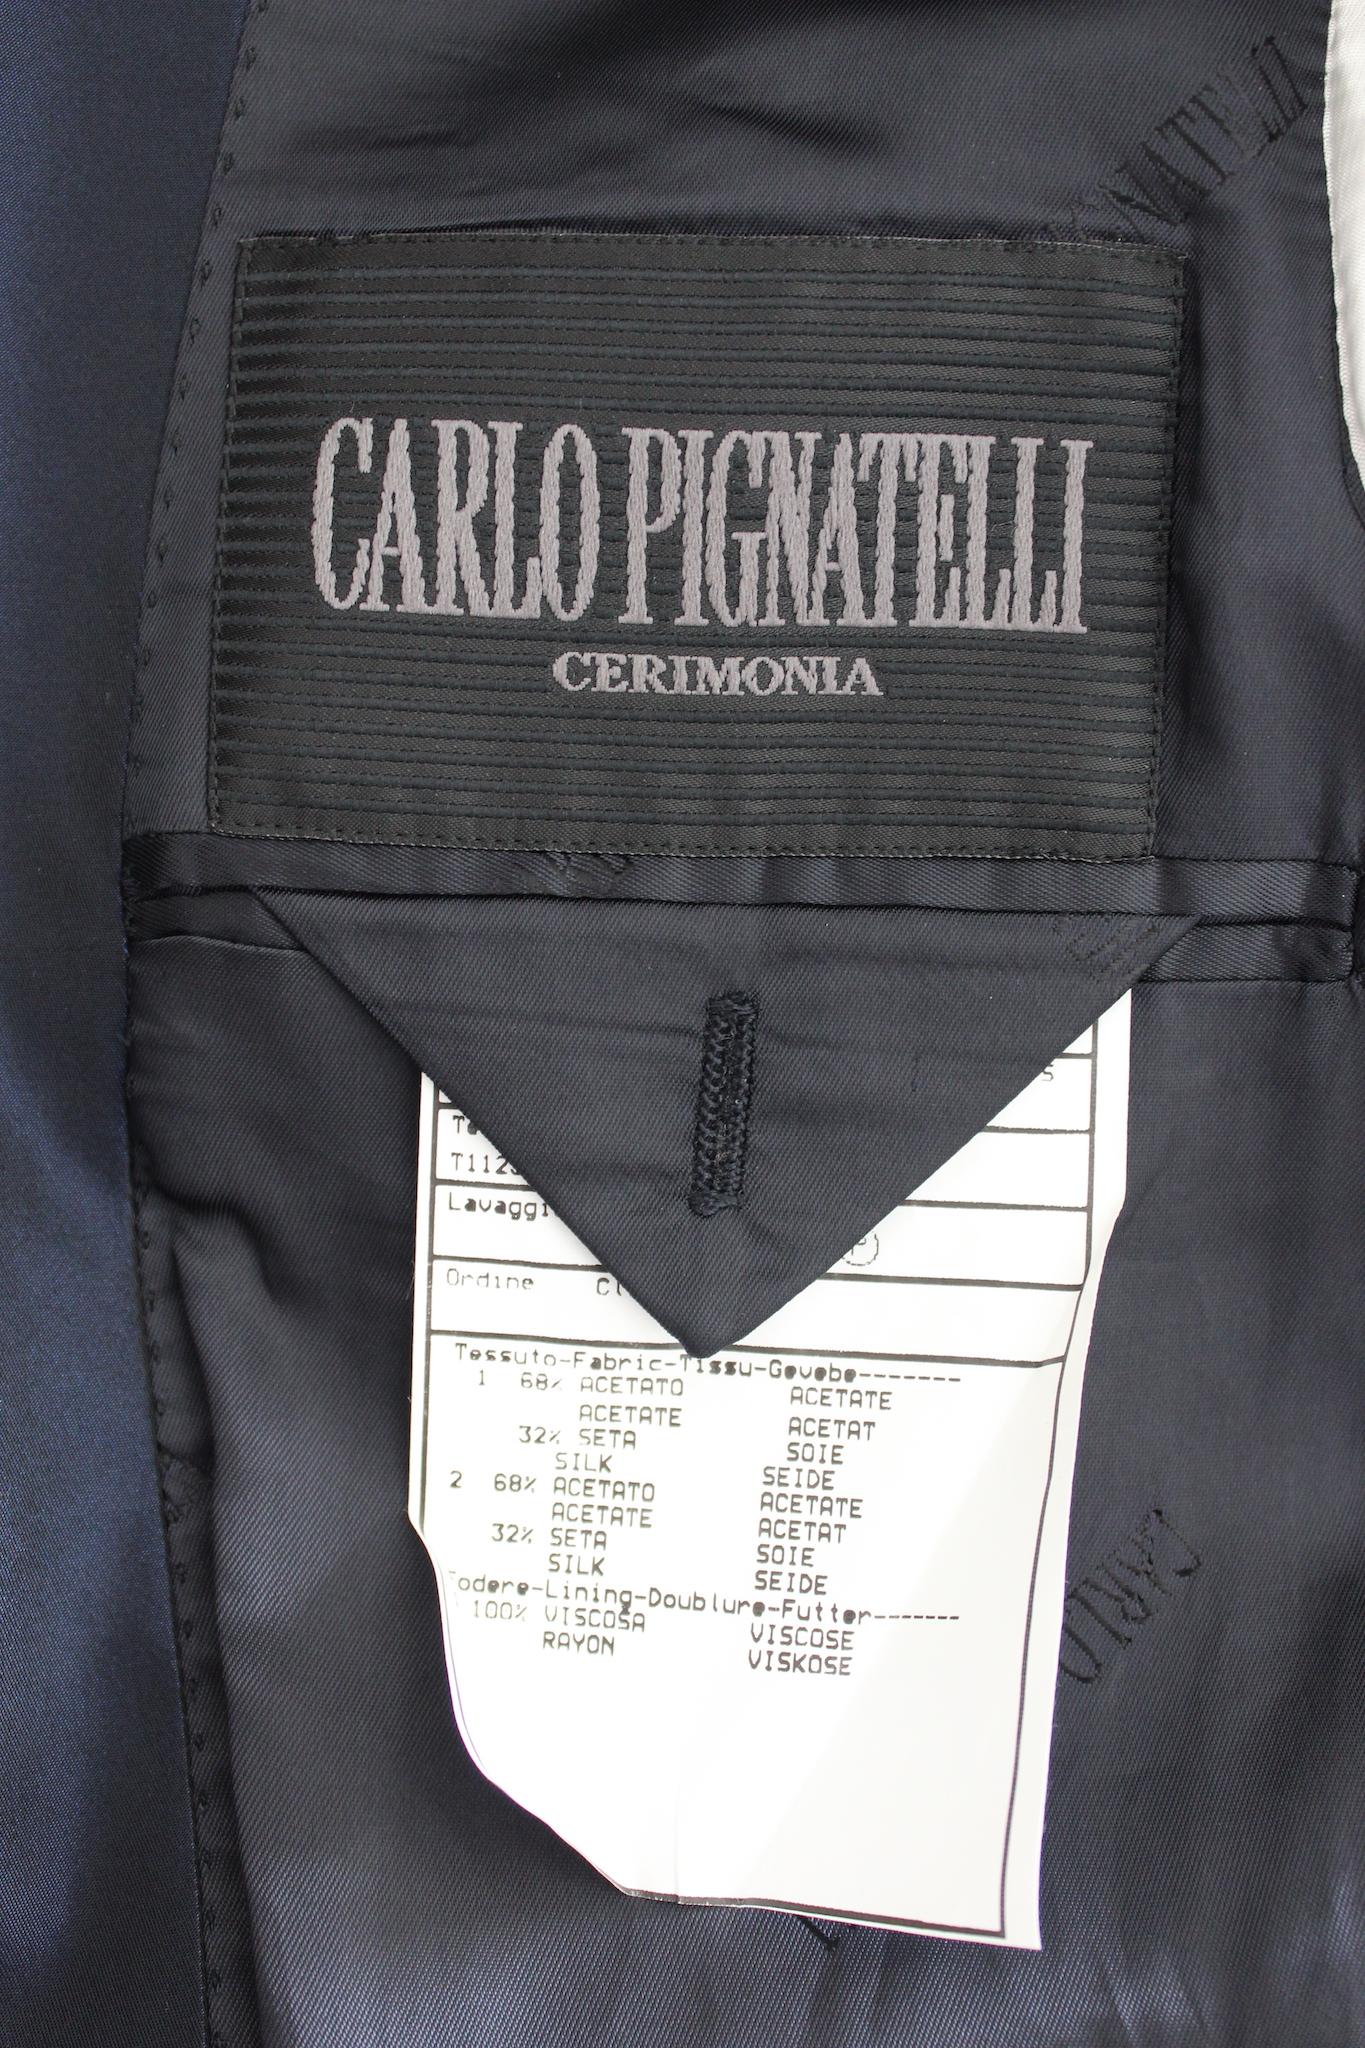 The Carlo Pignatelli pants suit is a sophisticated and elegant outfit, perfect for a groom or anyone attending a formal ceremony. The suit features a dark blue color that exudes a sense of formality and class. It is made from high-quality silk